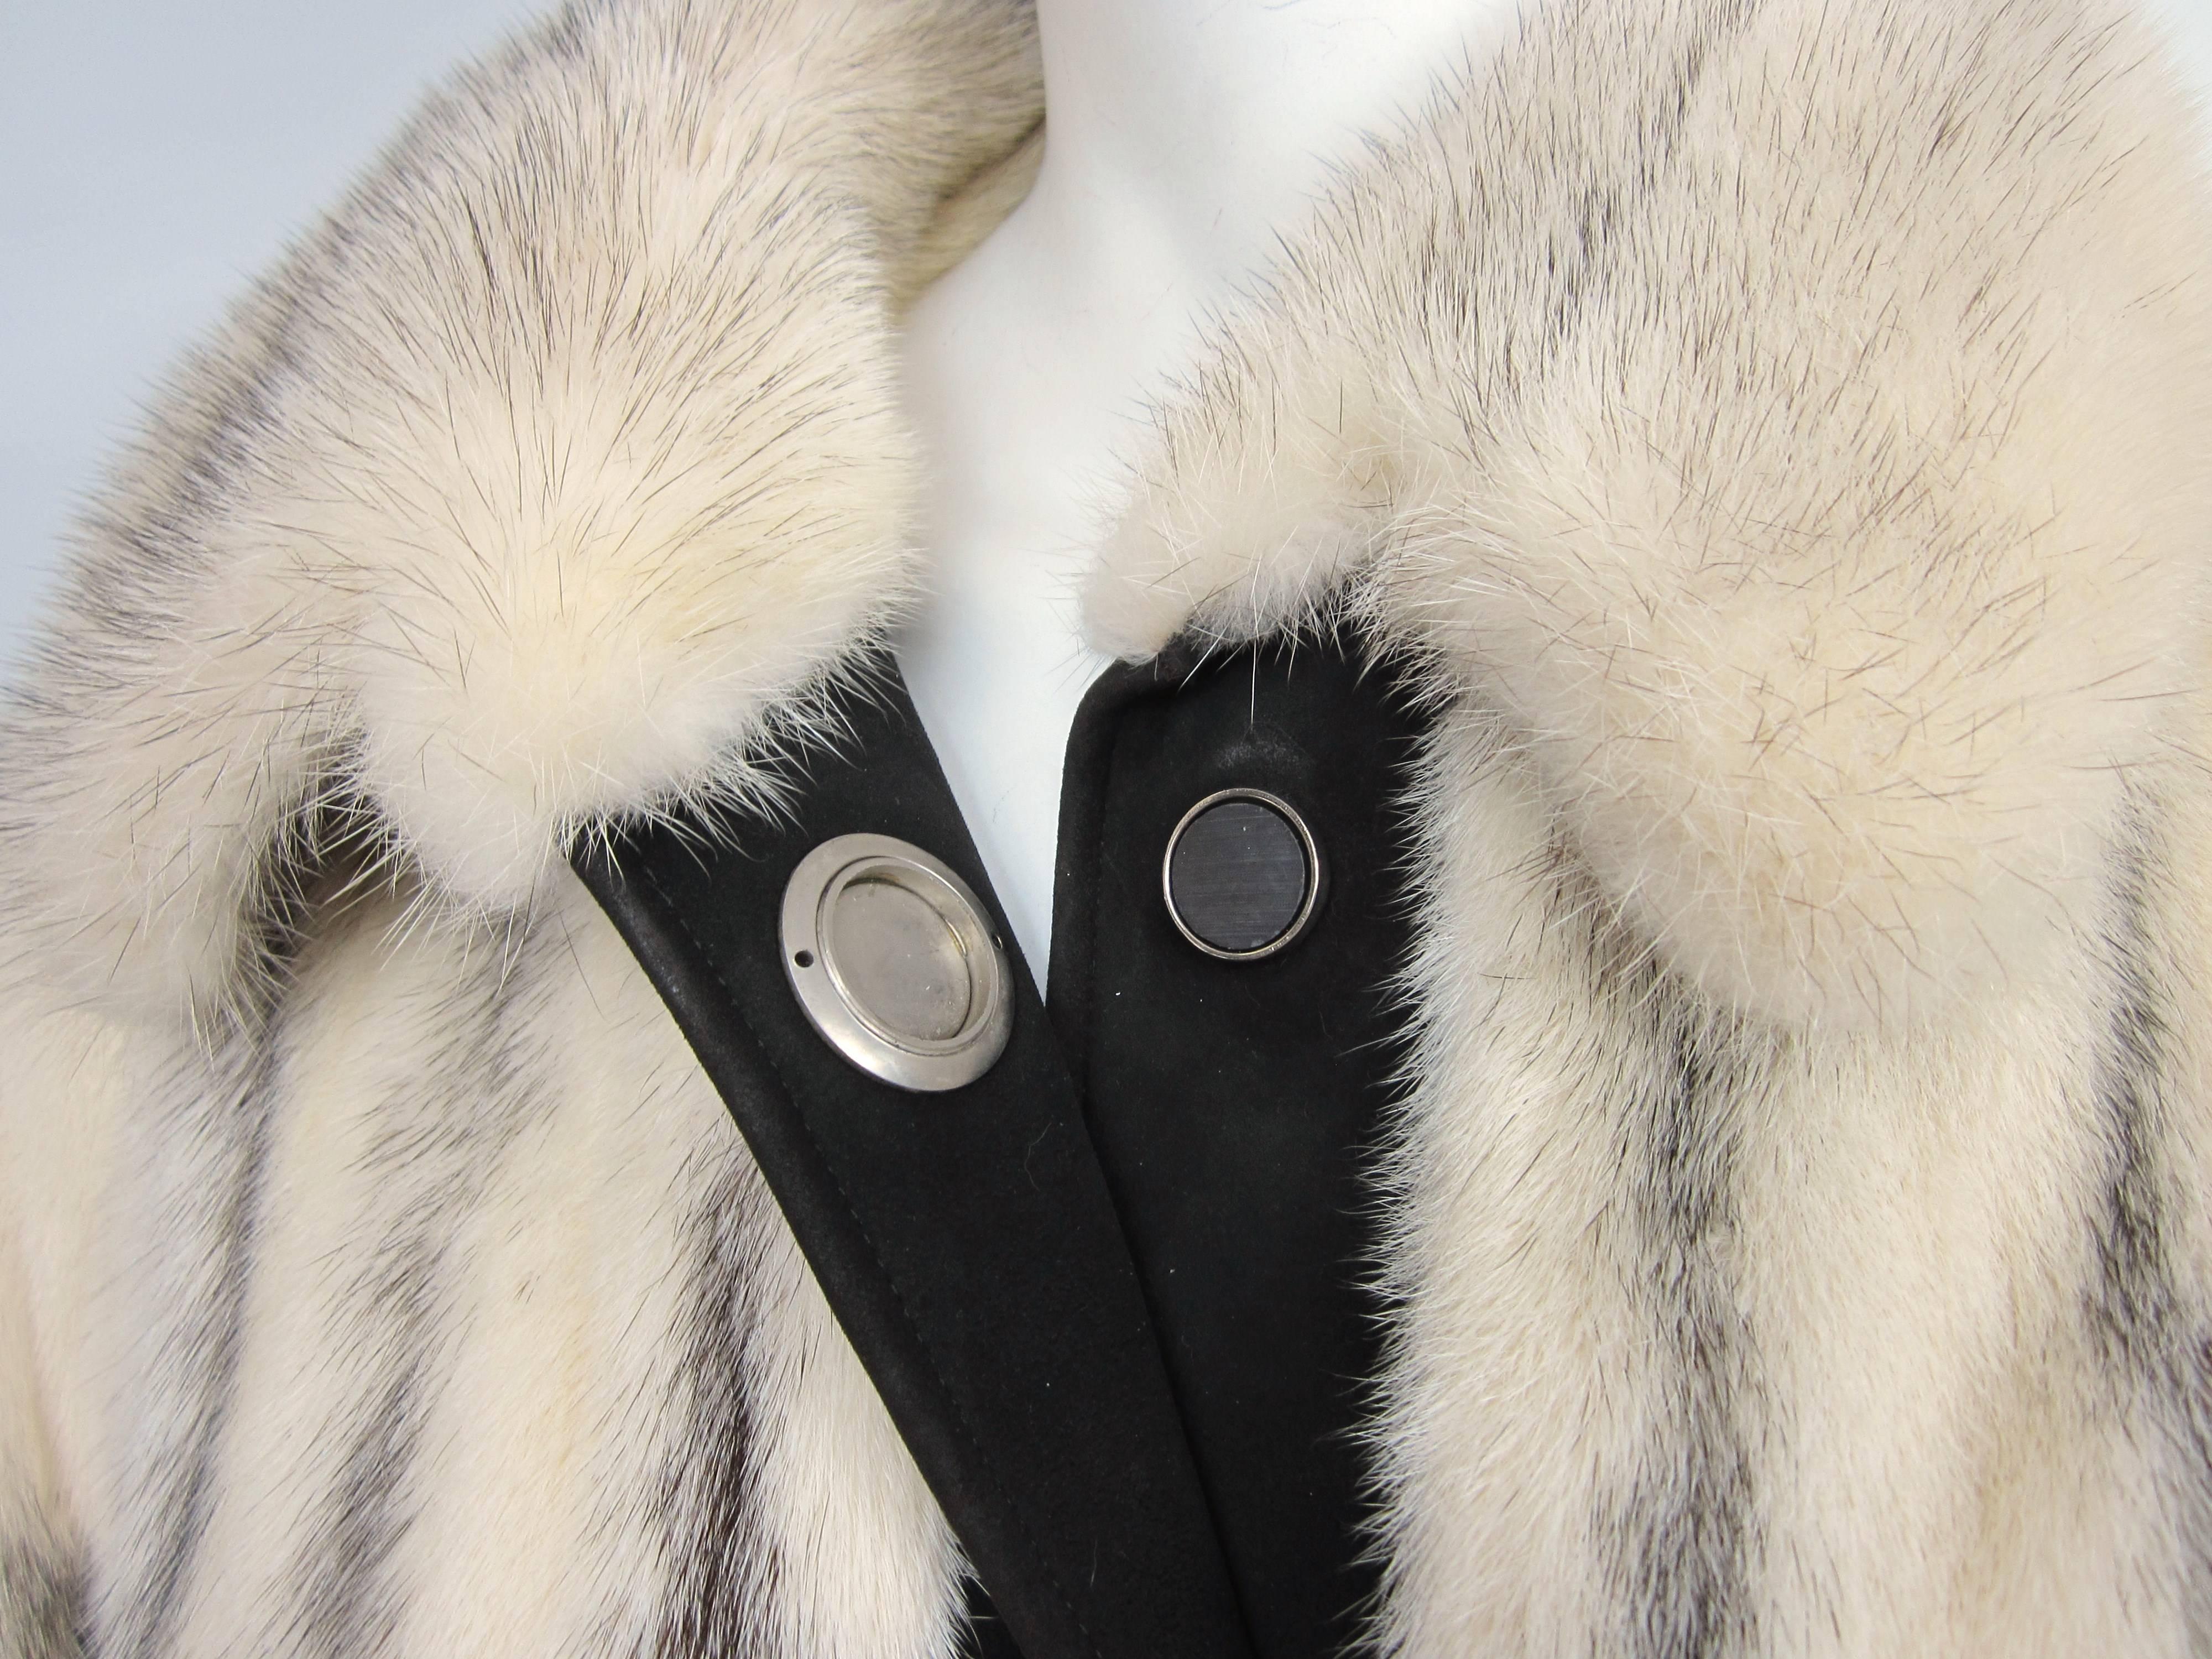 Stunning Black Cross mink Jacket with Suede accents (Cuffs, belt, and Buttons ) Magnetic Large Silver Tone Disc Buttons. Fur is soft and supple. 2 side pockets. Measures Bust up to 42 inches, Waist up to 48 in, Hips up to 50 in, length is 32 in from